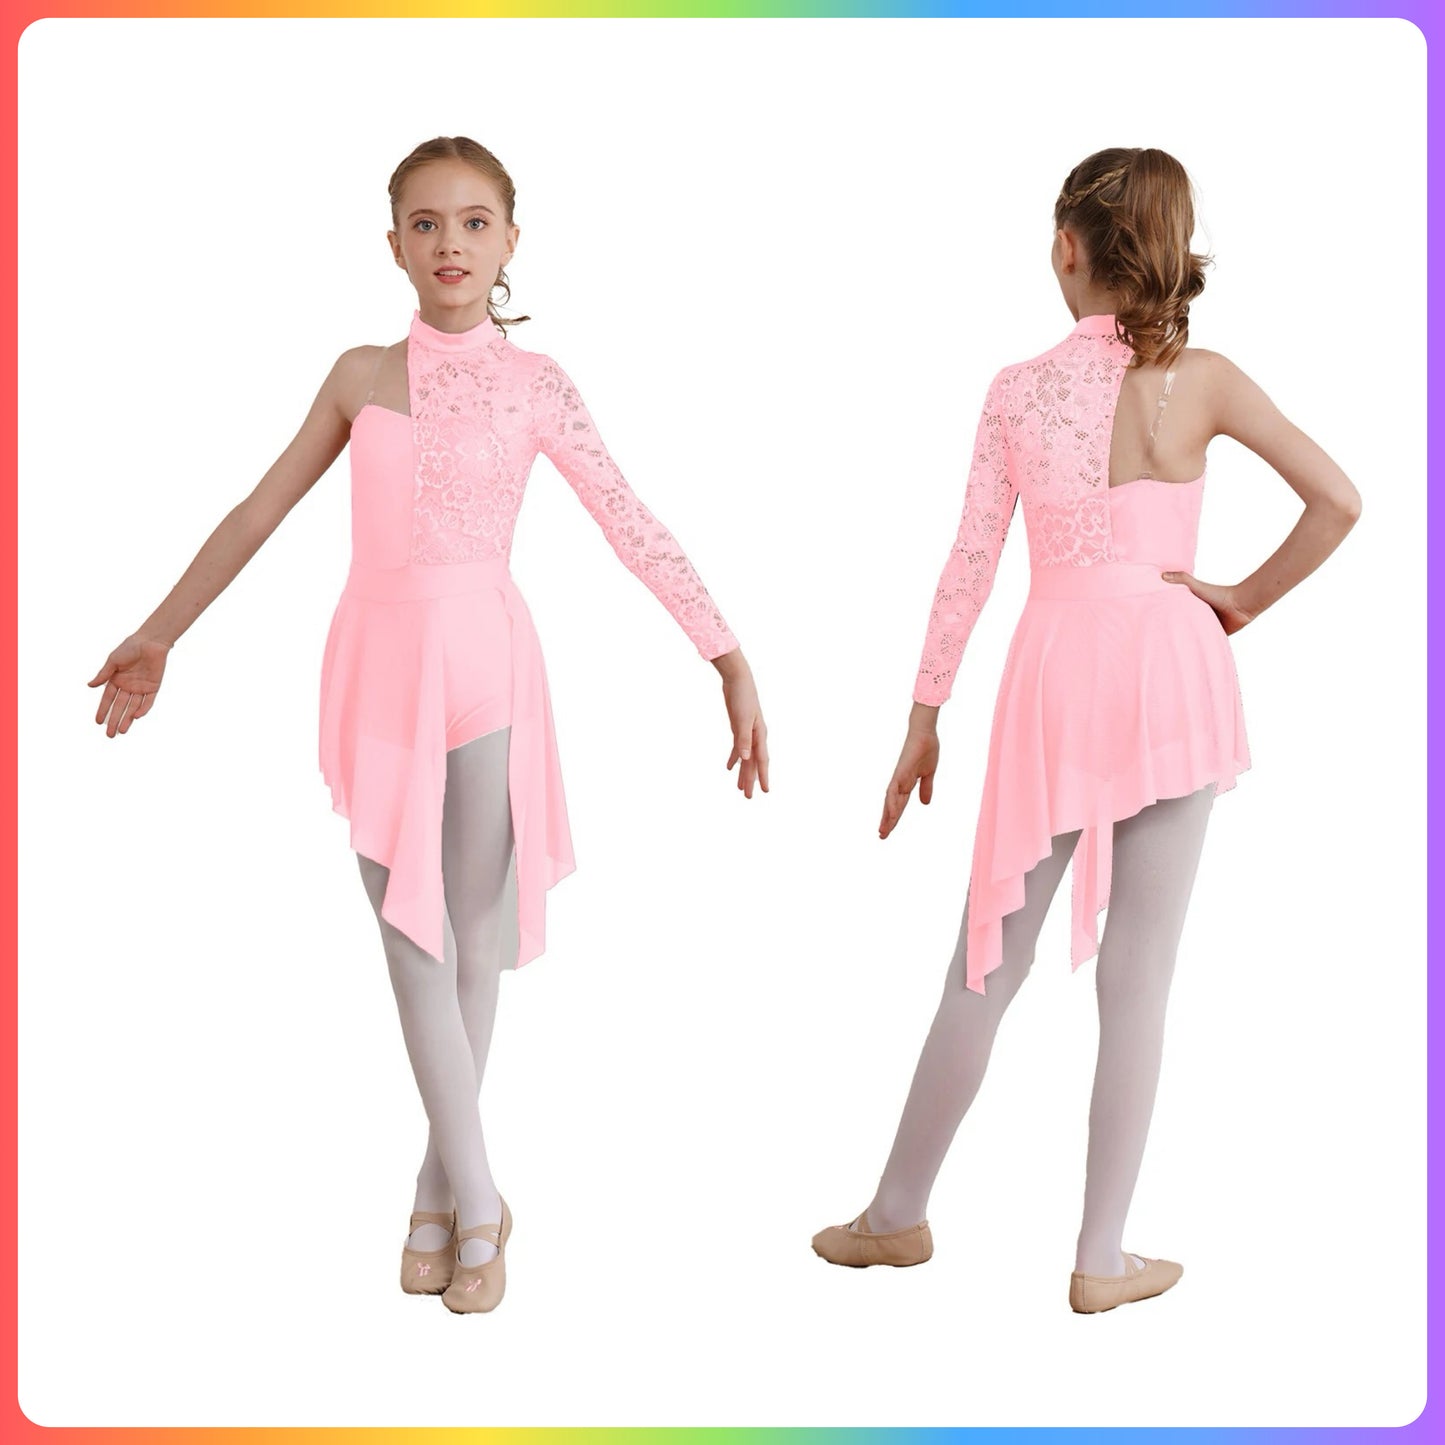 Girls Lace One Sleeve Lyrical / Contemporary Dance Costume